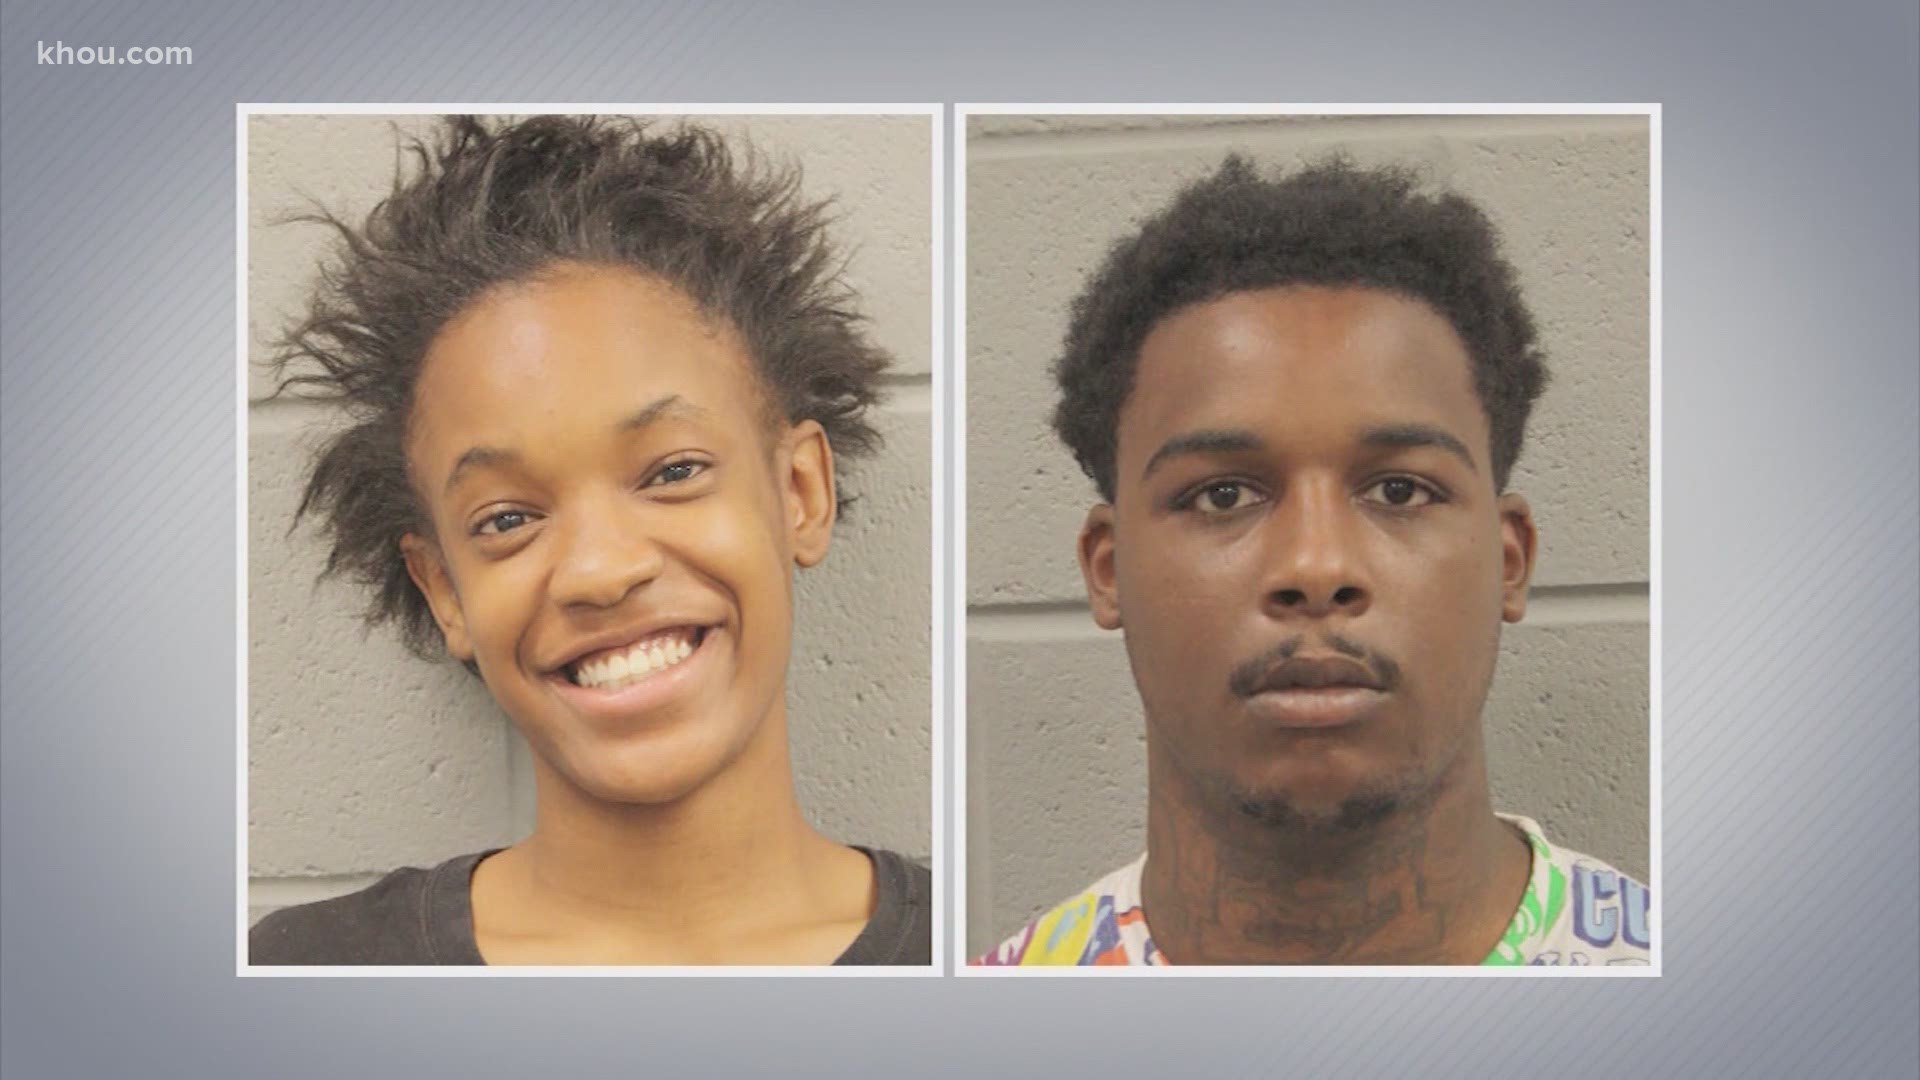 Maliyah Bass' mother, Sahara Ervin, and boyfriend, Travion Thompson, are charged with injury to a child and tampering with evidence.